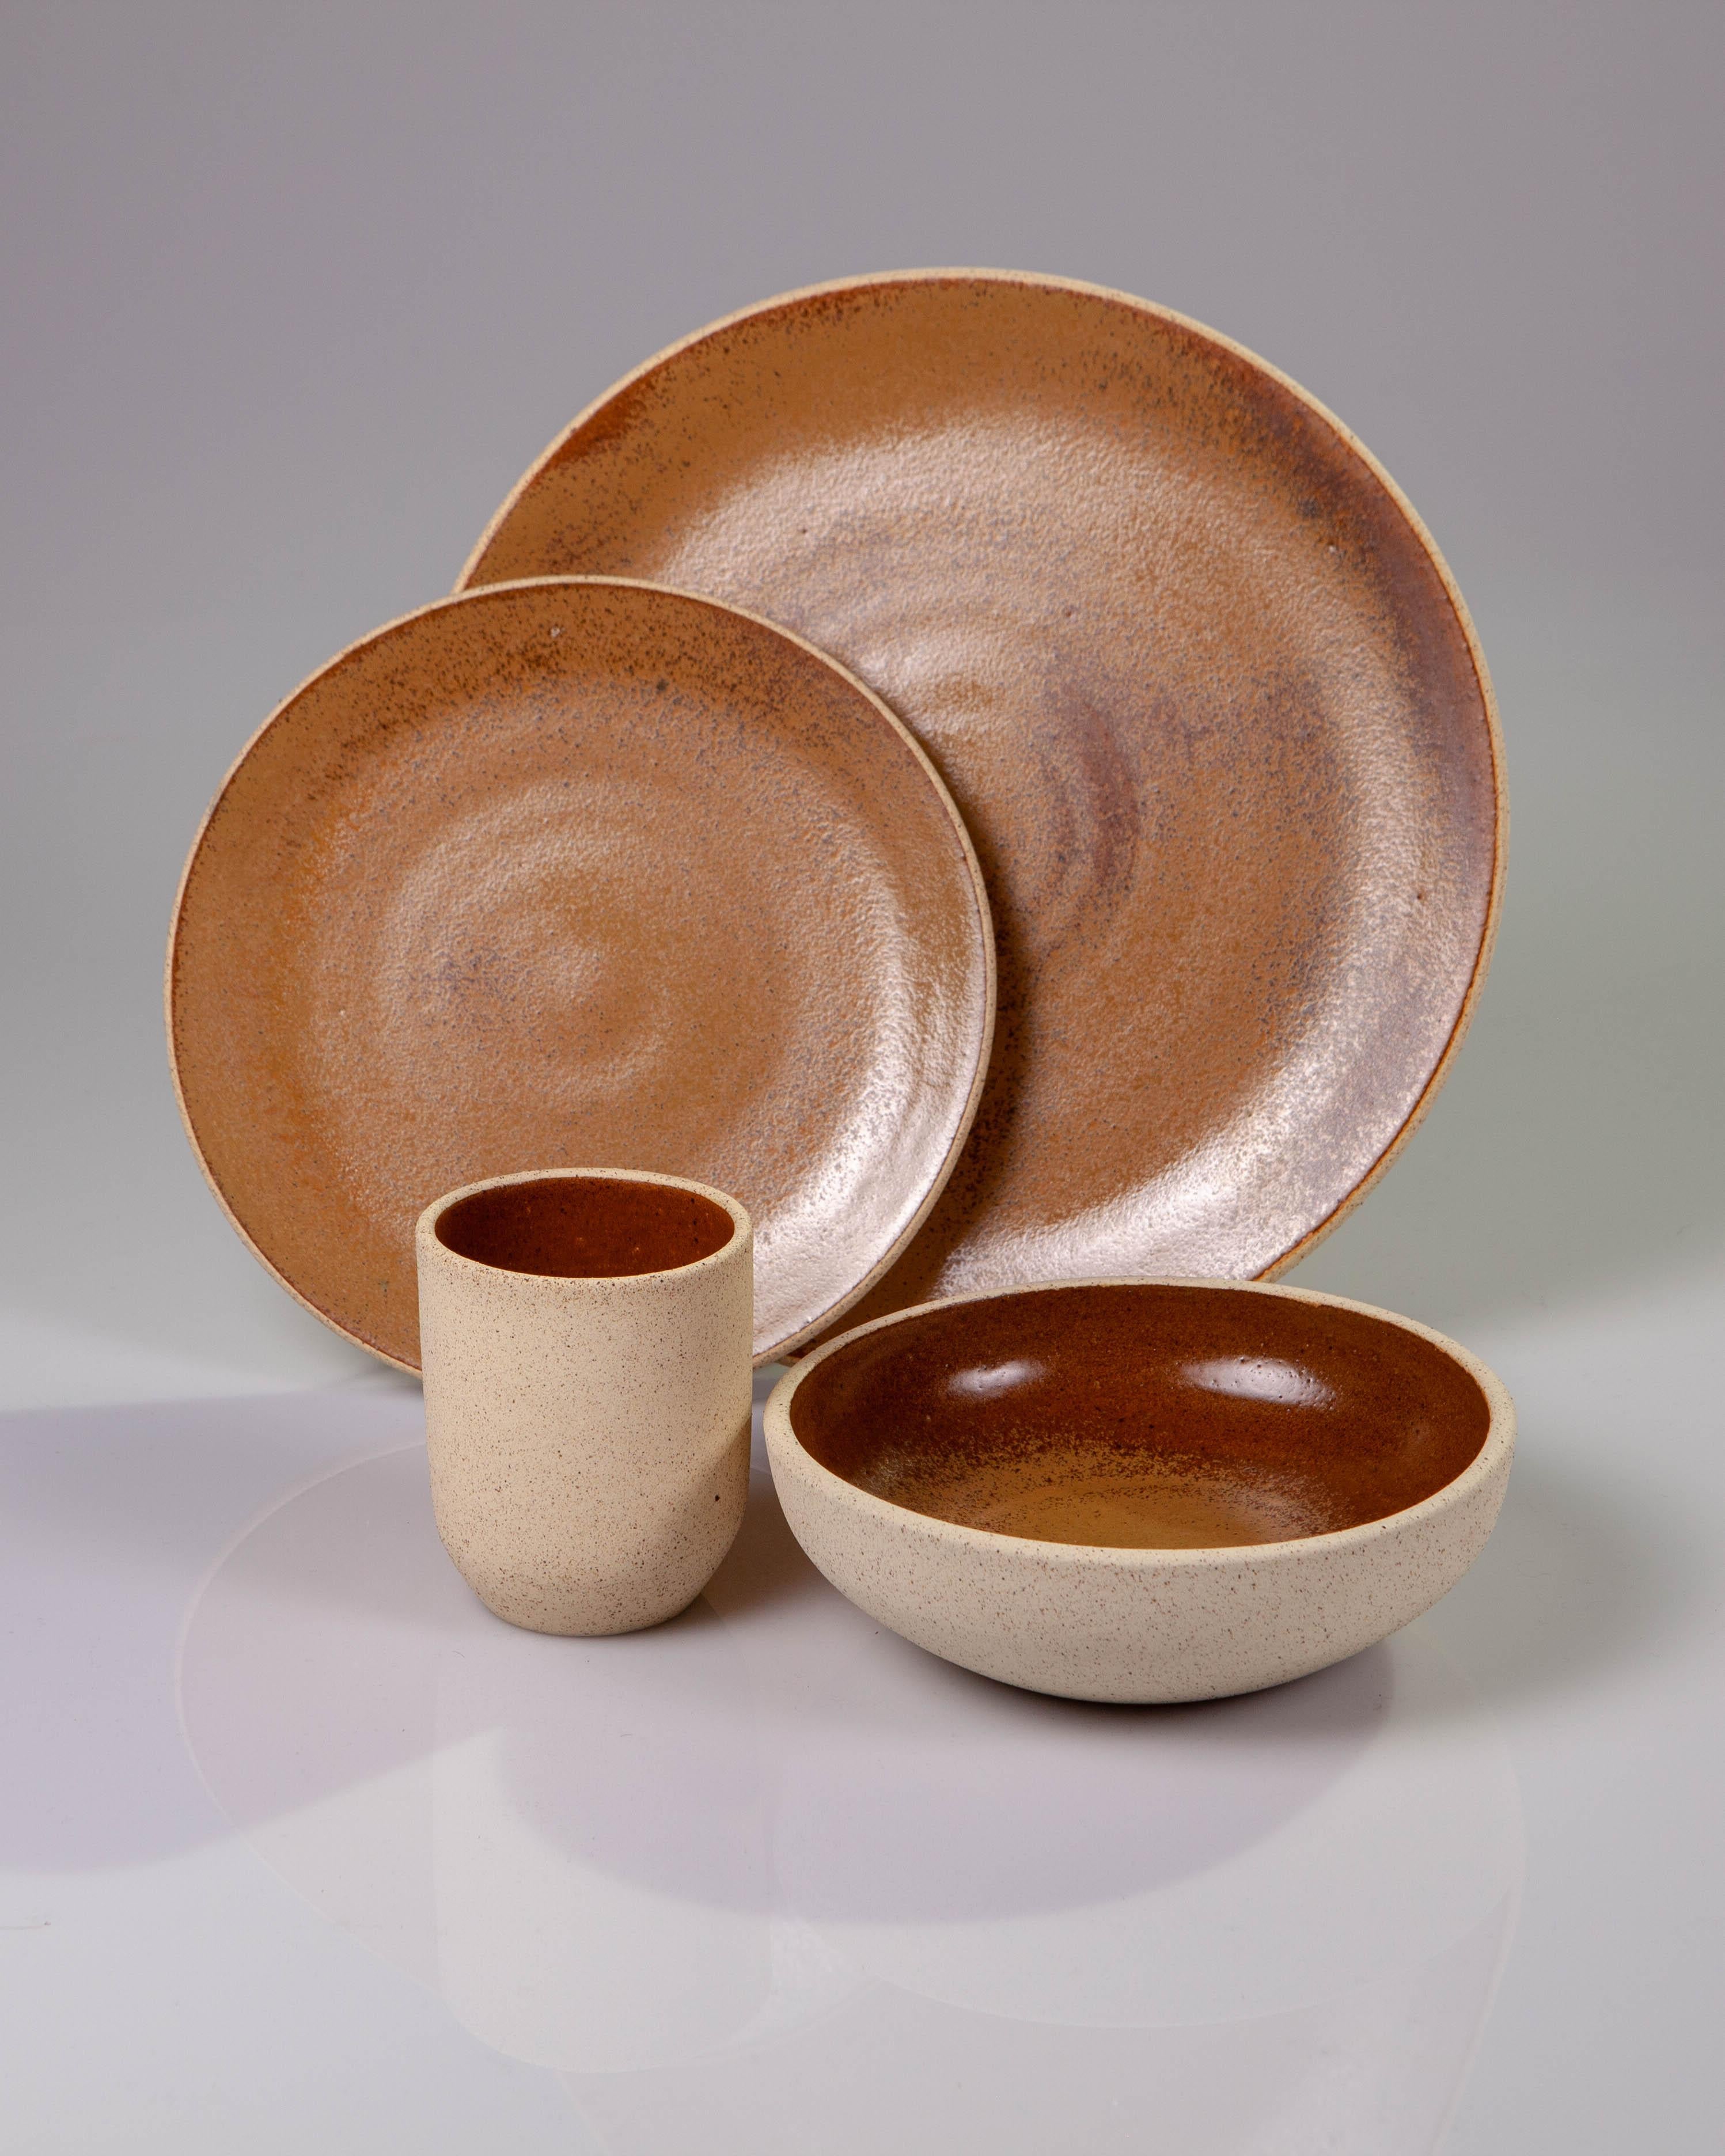 Handmade dinnerware from Tlaquepaque, Jalisco, Mexico, by a family of ceramicists that have been creating handmade earthenware for over 60 years, these pieces are made using multigenerational techniques yet designed for the modern table. Their clean